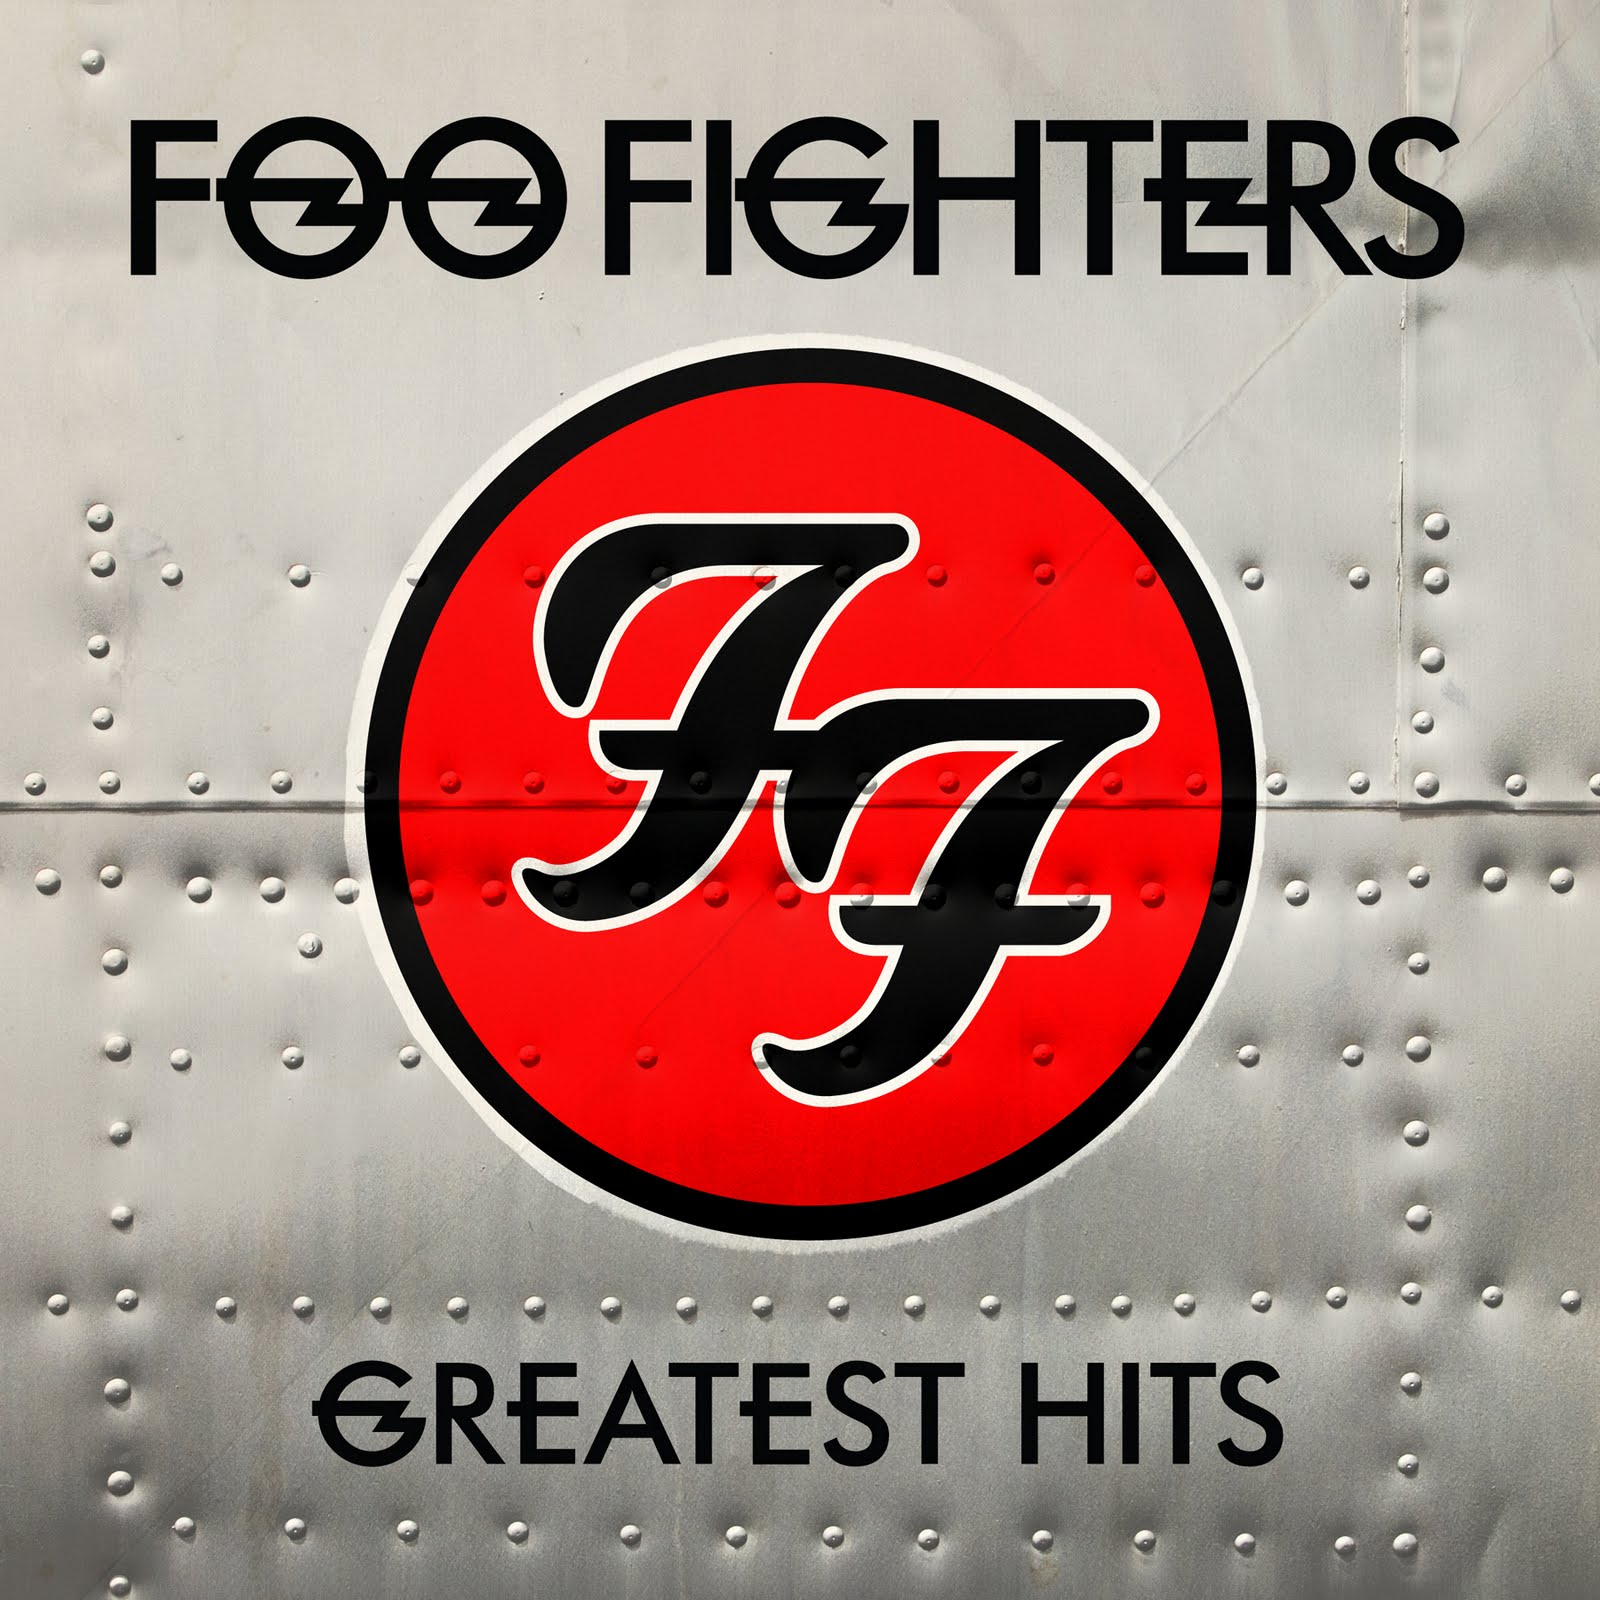 Foo Fighters - Greatest Hits a lbum: DOWNLOAD.